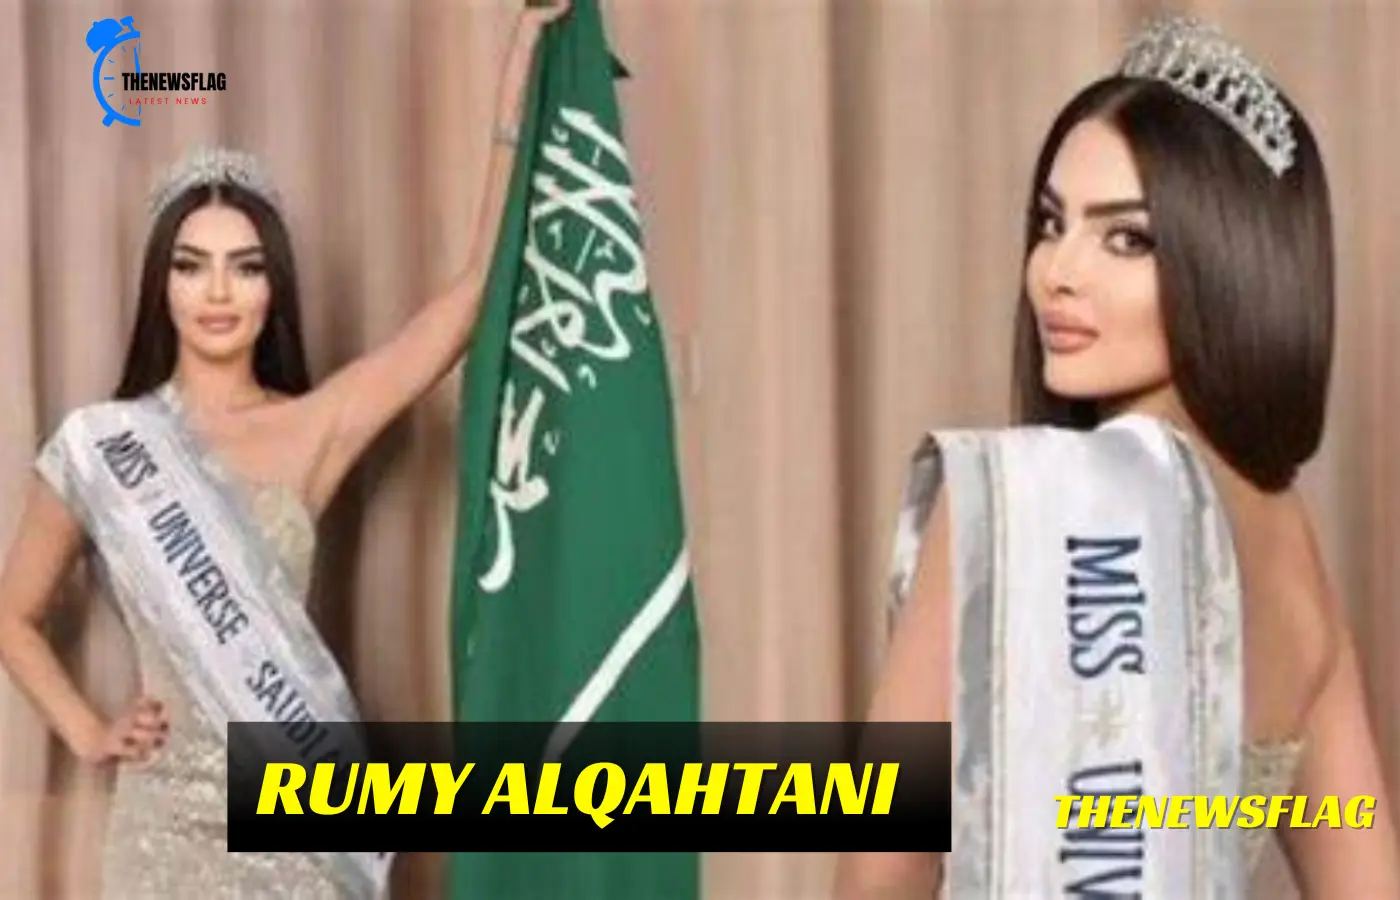 For the first time ever, Saudi Arabia will compete in the Miss Universe pageant.